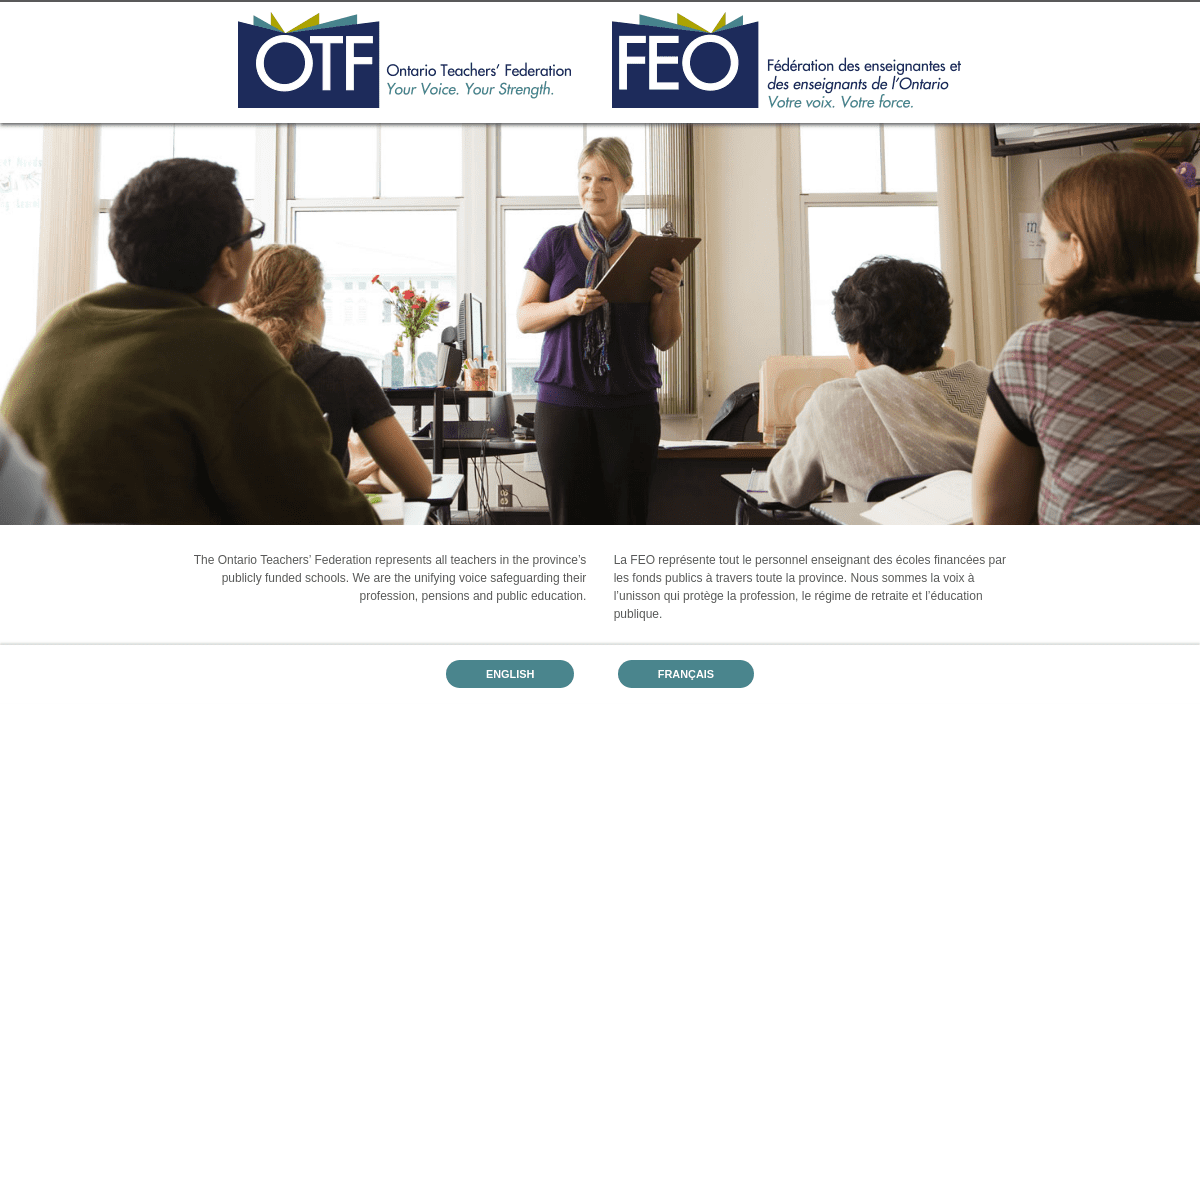 A complete backup of otffeo.on.ca